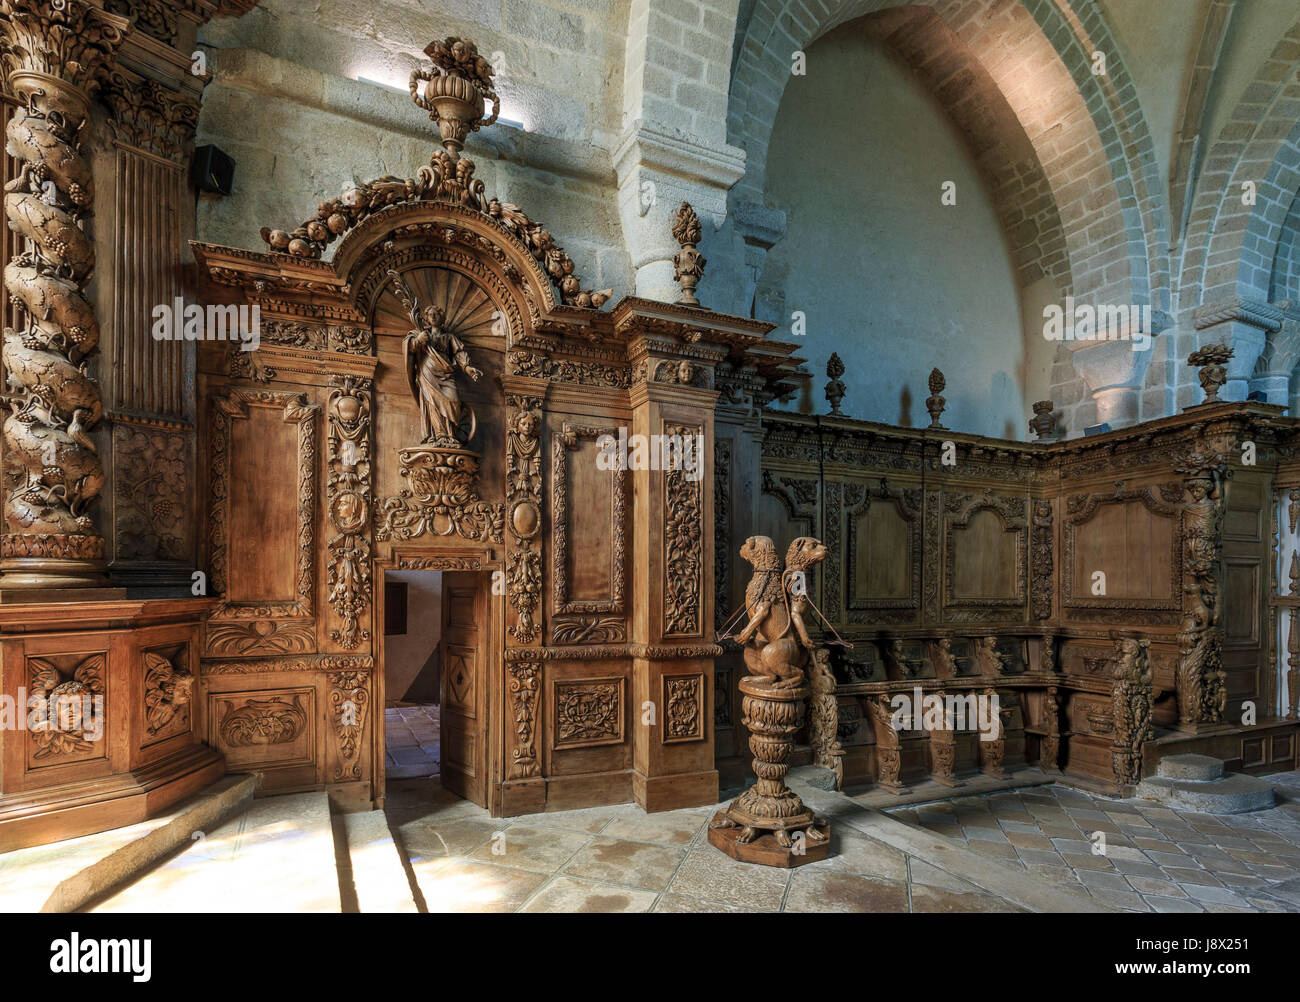 France, Creuse, Moutier-d'Ahun, Moutier d'Ahun abbey, the carved woodwork in the church Stock Photo